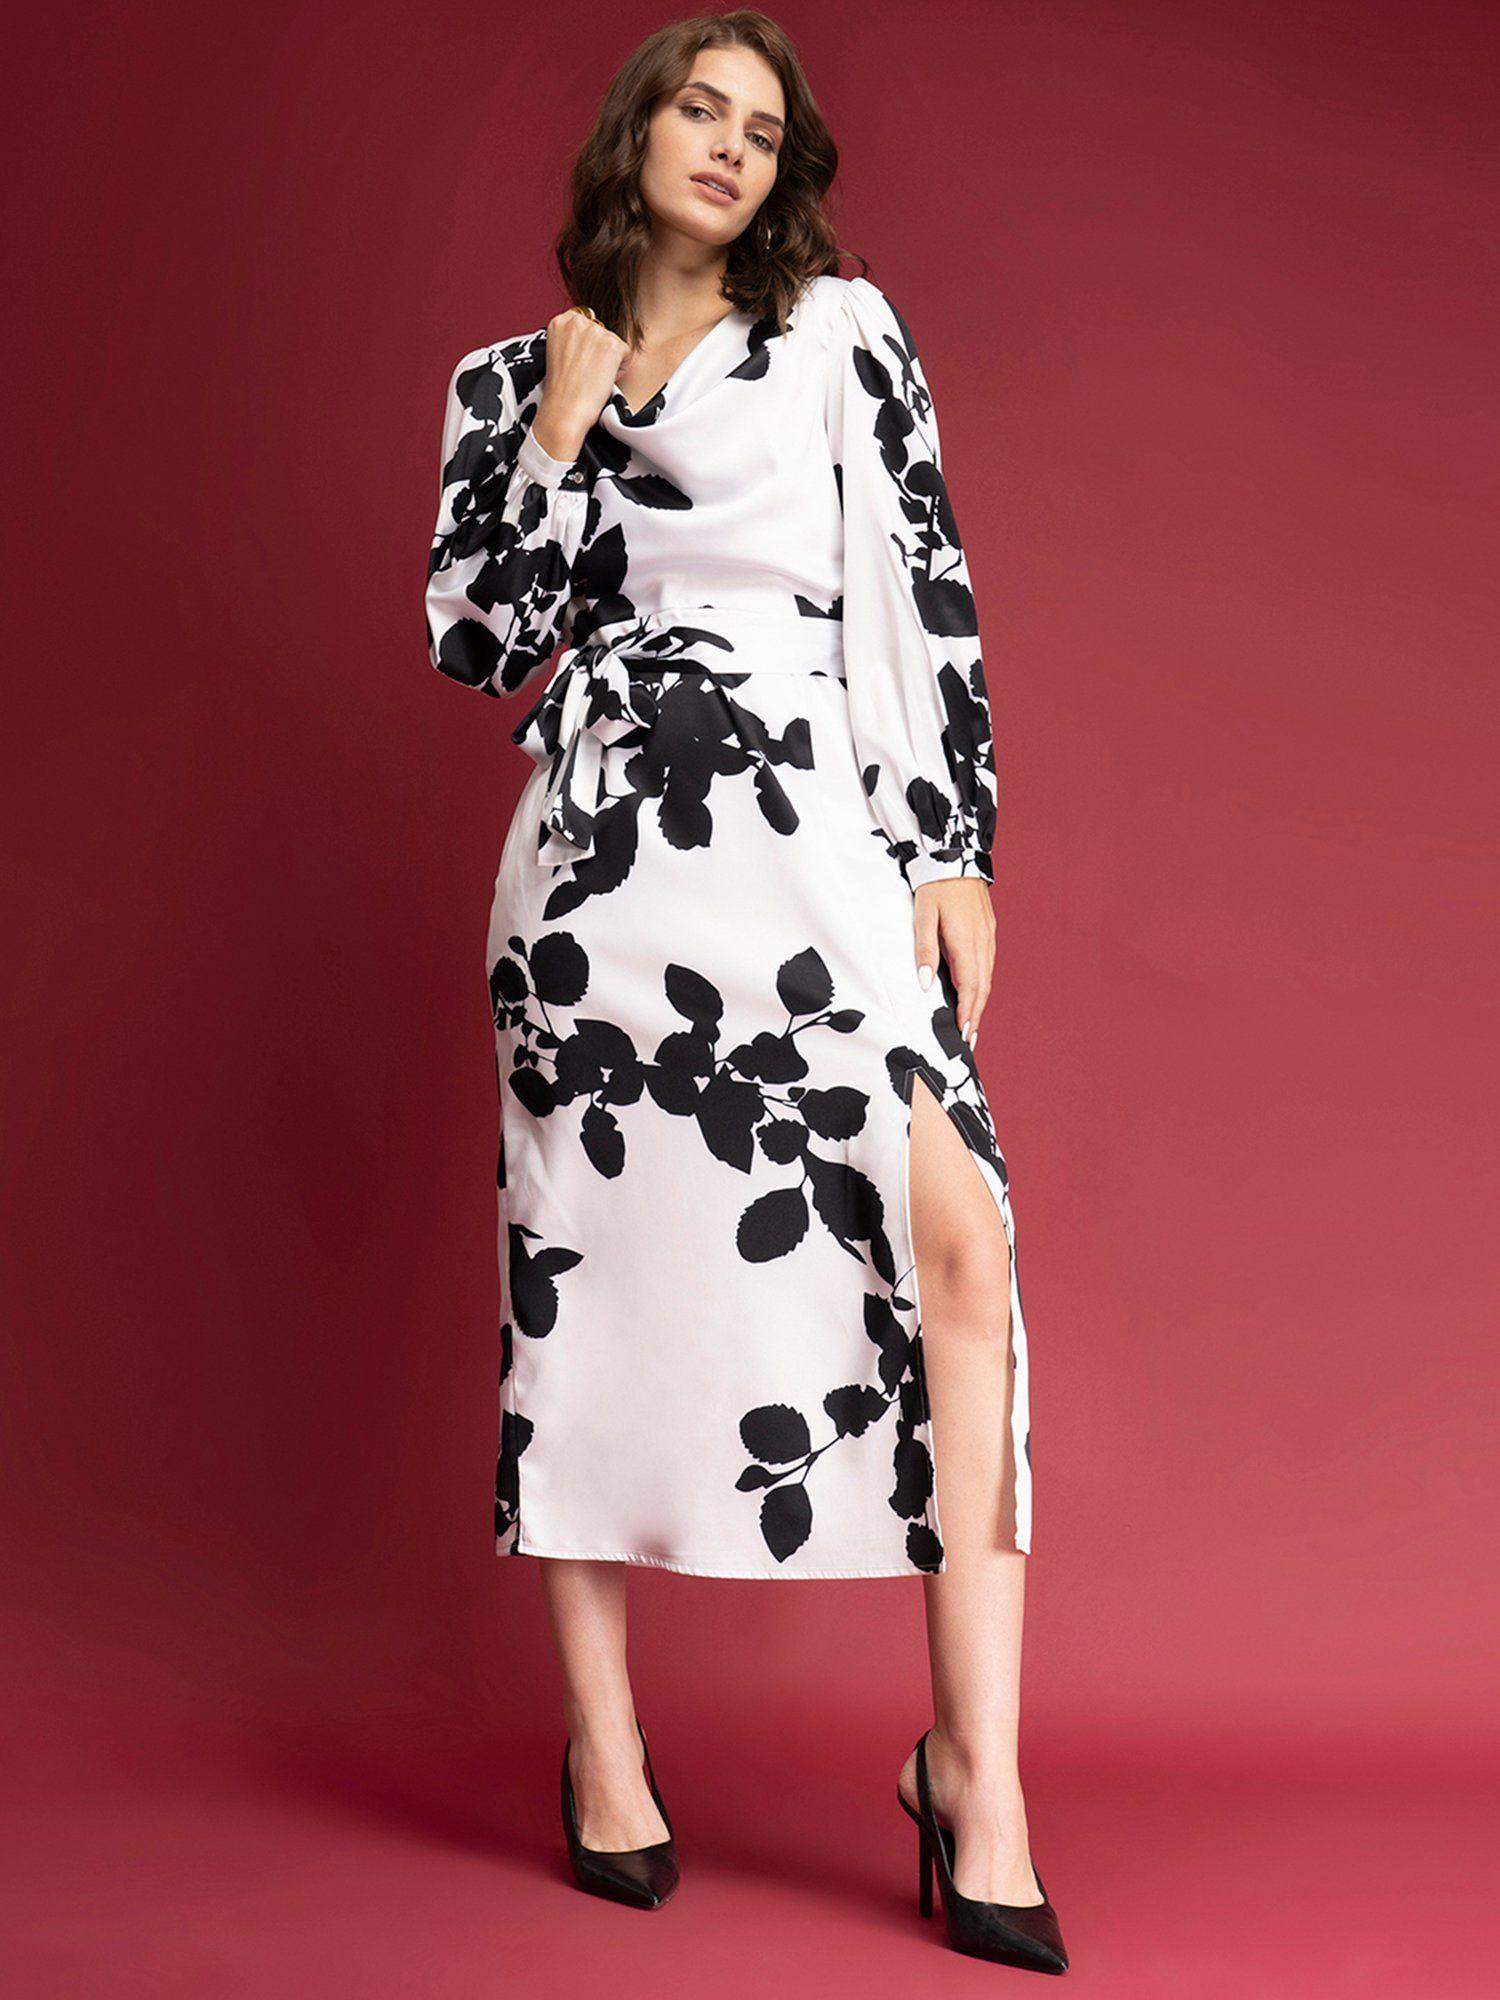 satin-floral-print-a-line-dress---black-and-white